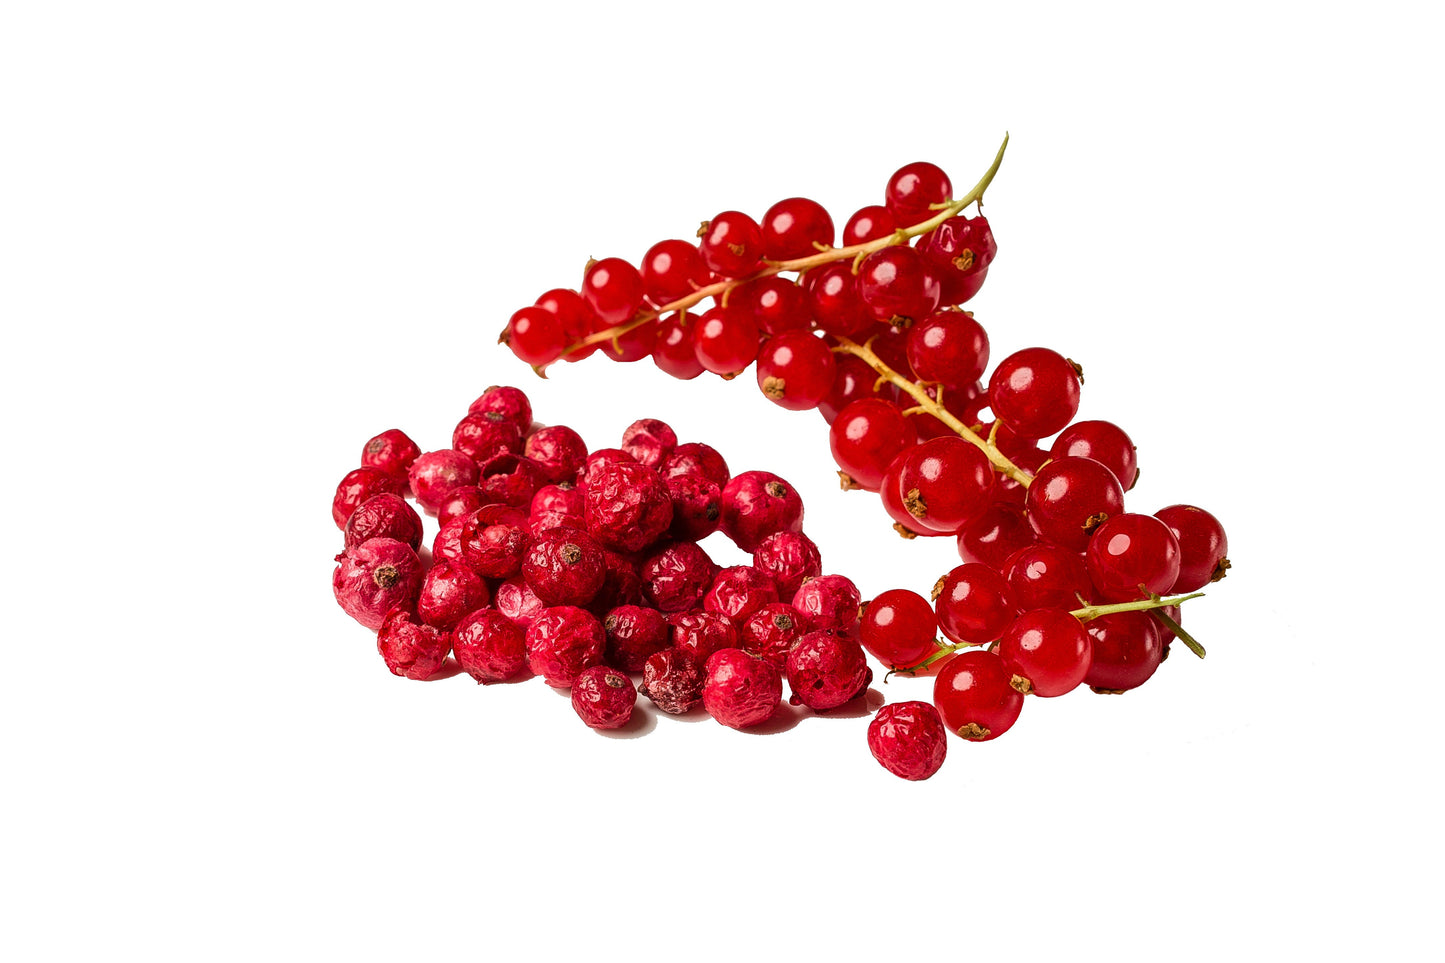 Freeze Dried Red Currant Snack by The Rotten Fruit Box